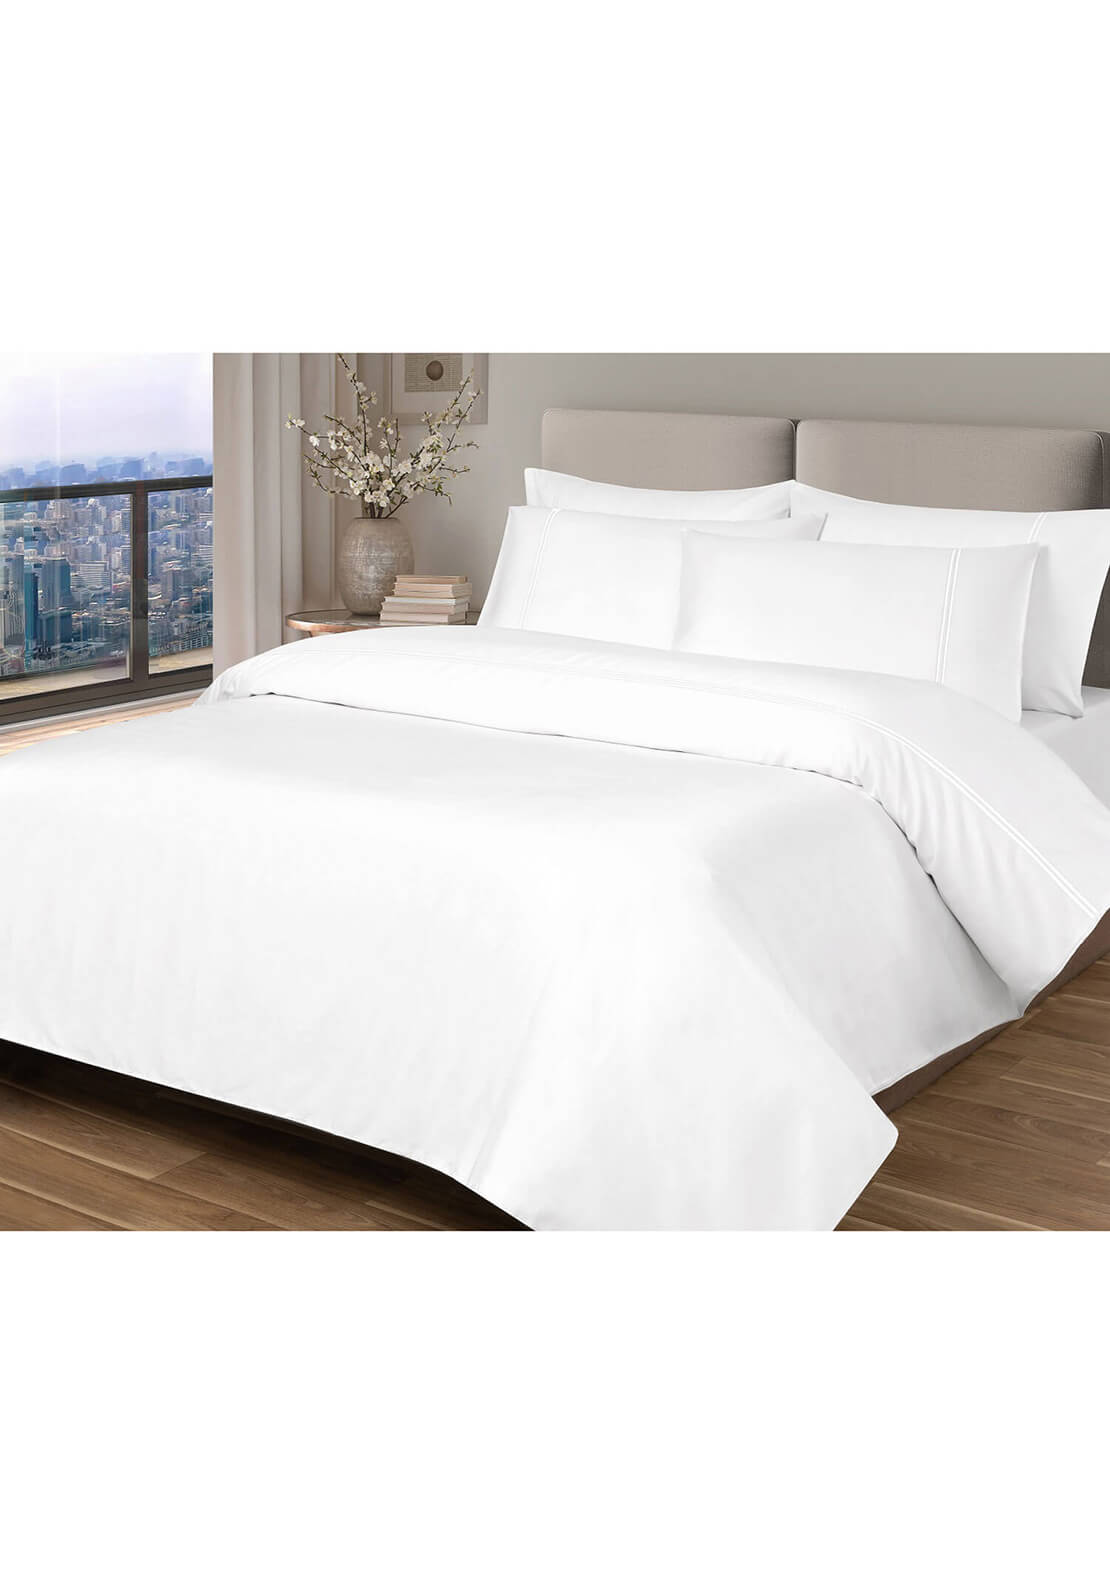 Heather &amp; Ferne 300 Thread Count 100% Cotton Sateen Fitted Sheet - White 1 Shaws Department Stores